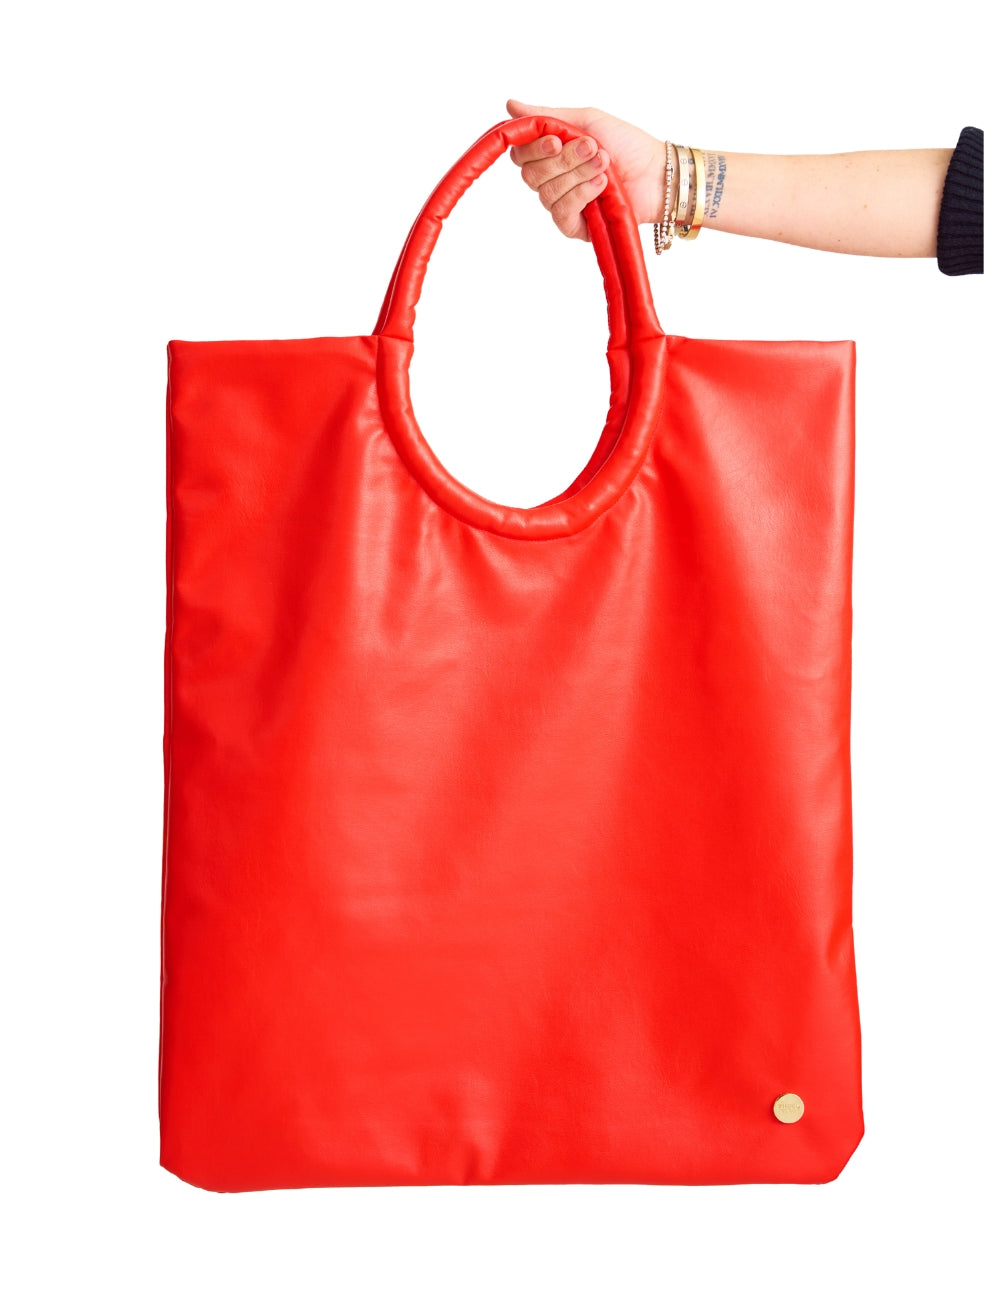 24 hour tote bright red tart oversized tote FREED made in Canada faux leather